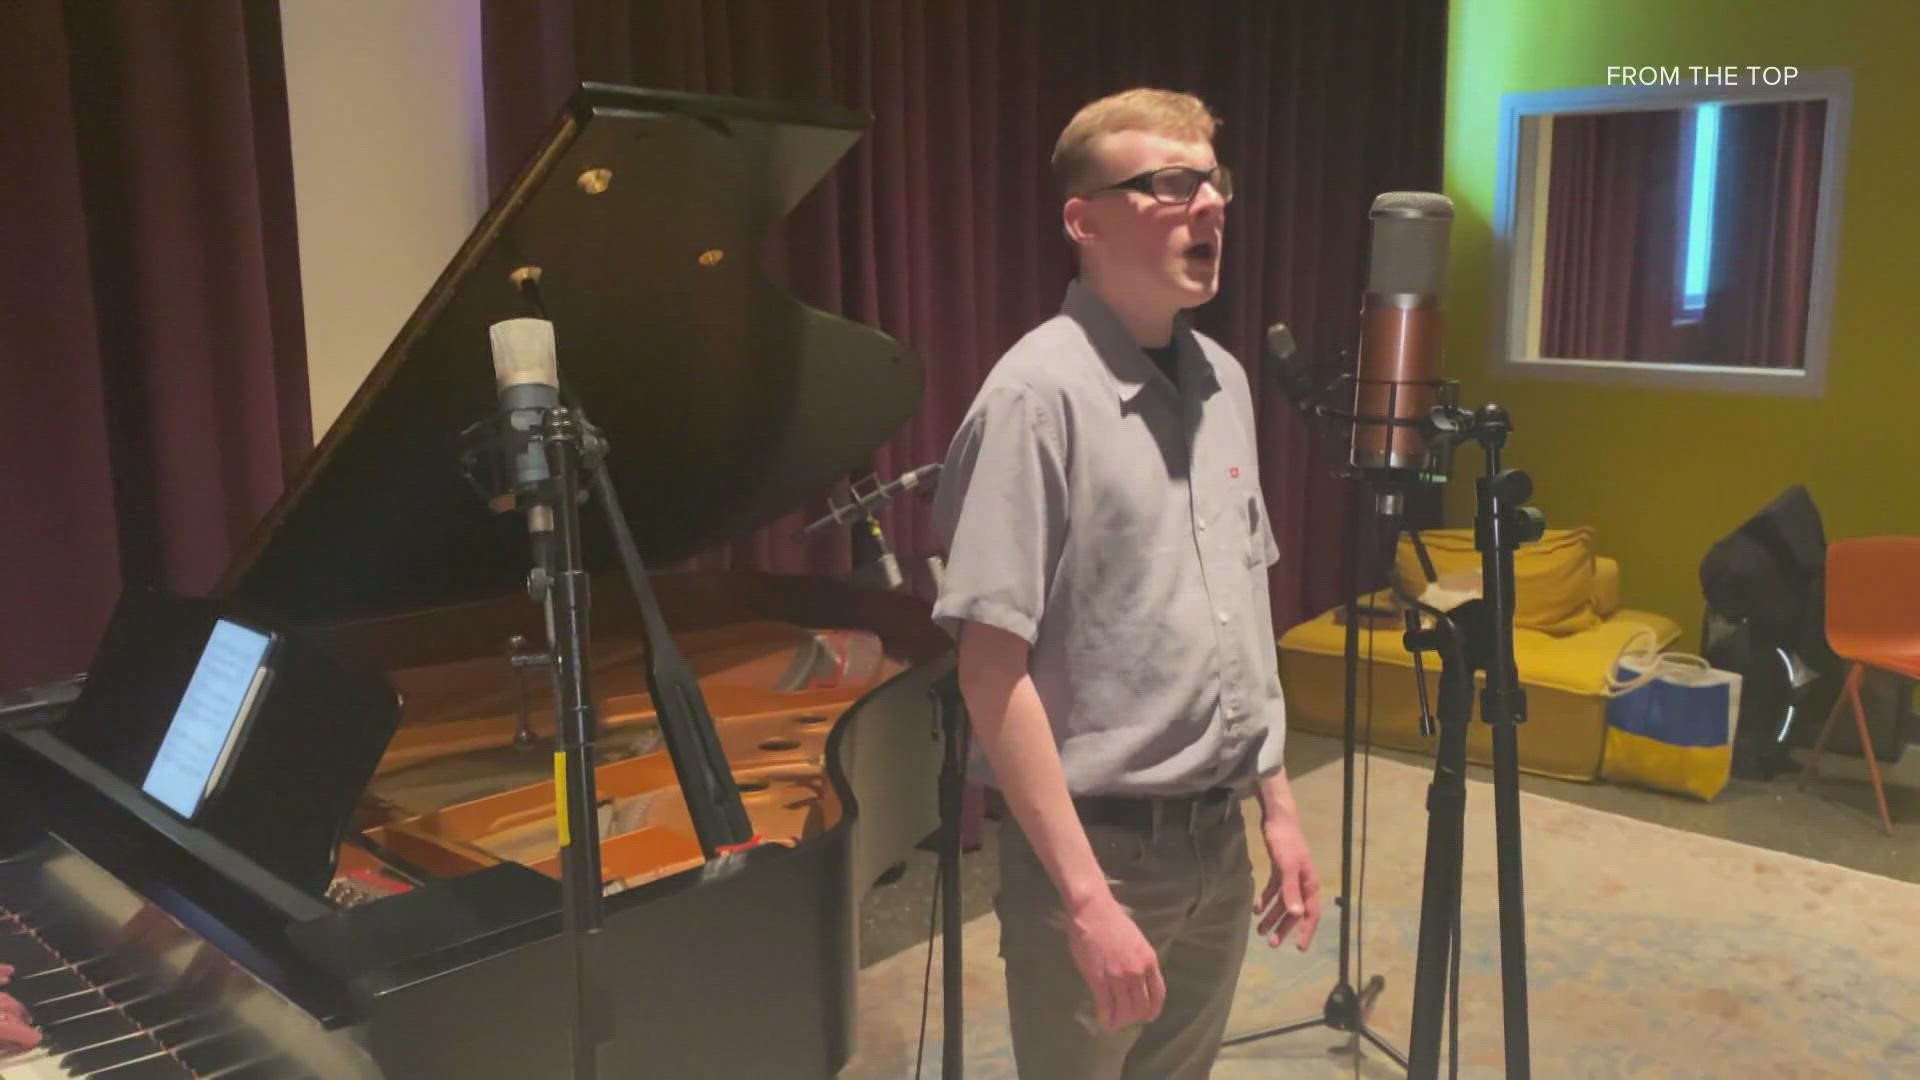 High School senior Noah Carver of Beals Island sings on NPR's "From The Top" and wins national award.